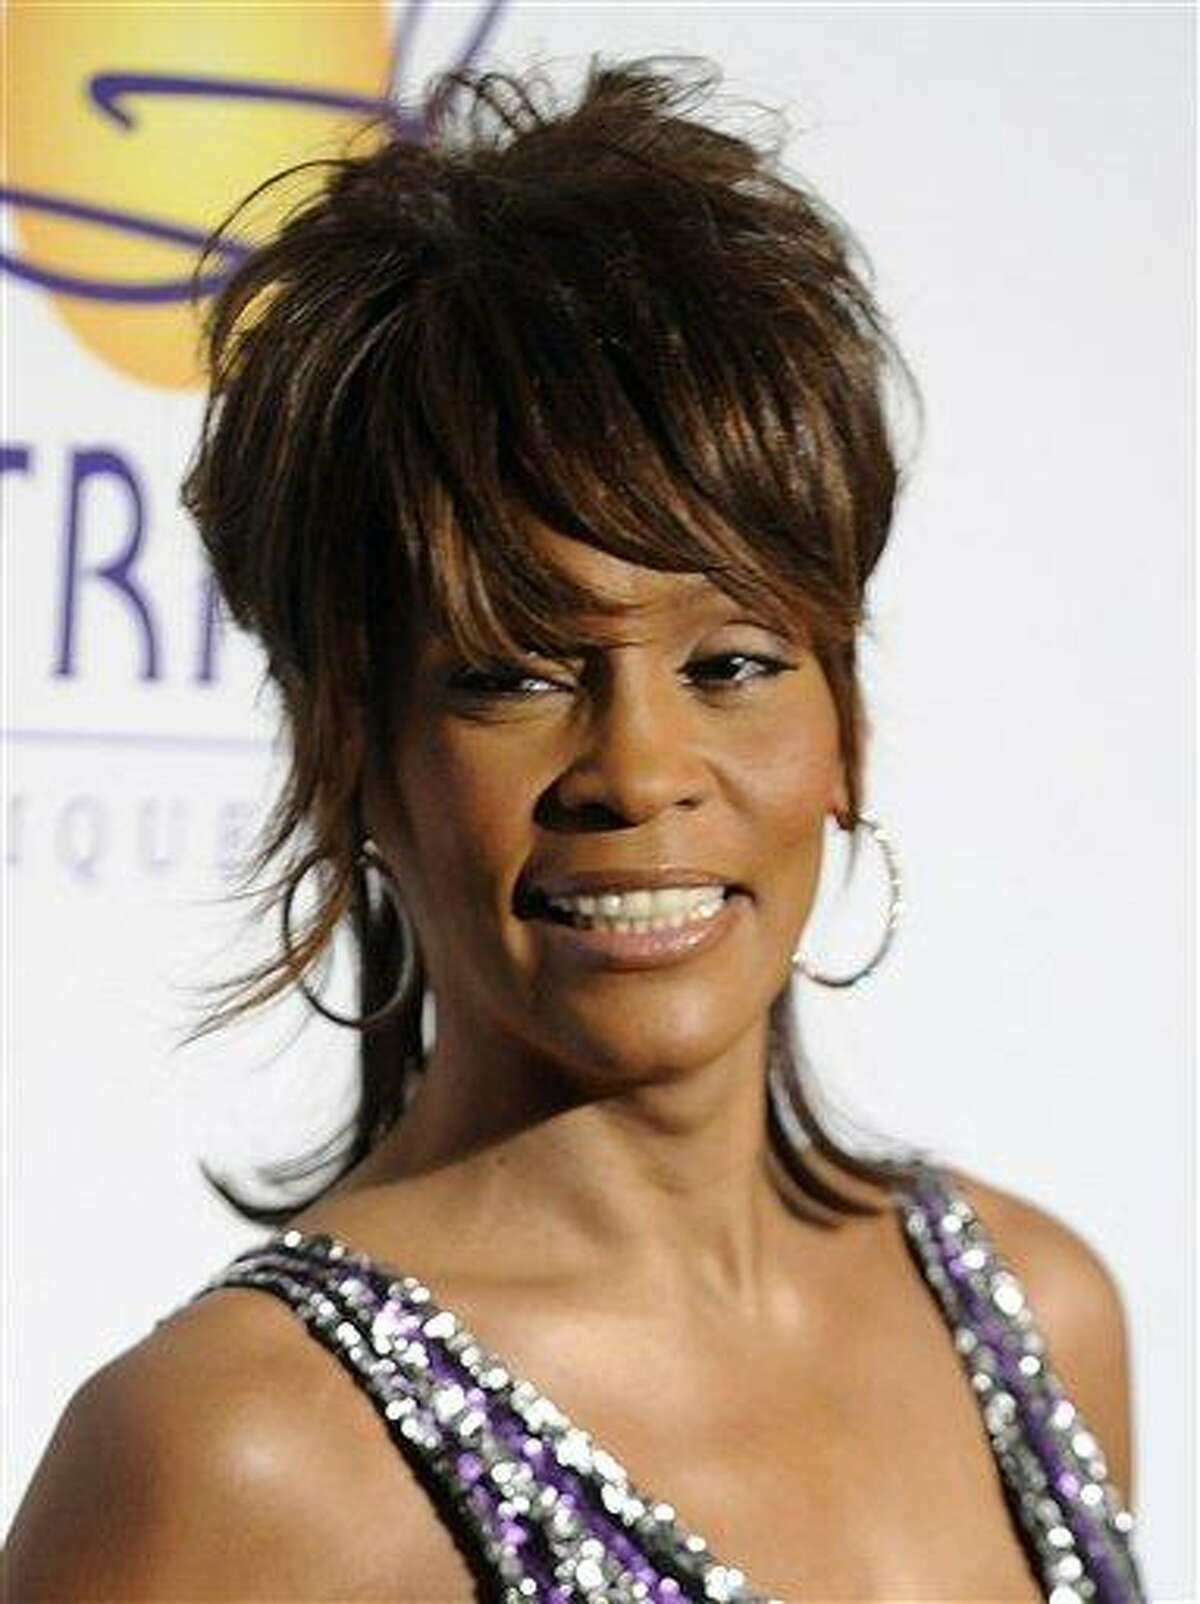 FILE - In this Feb. 9, 2008 file photo, singer Whitney Houston arrives at the Clive Davis Pre-Grammy Party in Beverly Hills, Calif. Whitney Houston, who reigned as pop music's queen until her majestic voice and regal image were ravaged by drug use, has died, Saturday, Feb. 11, 2012. She was 48. (AP Photo/Chris Pizzello, file)